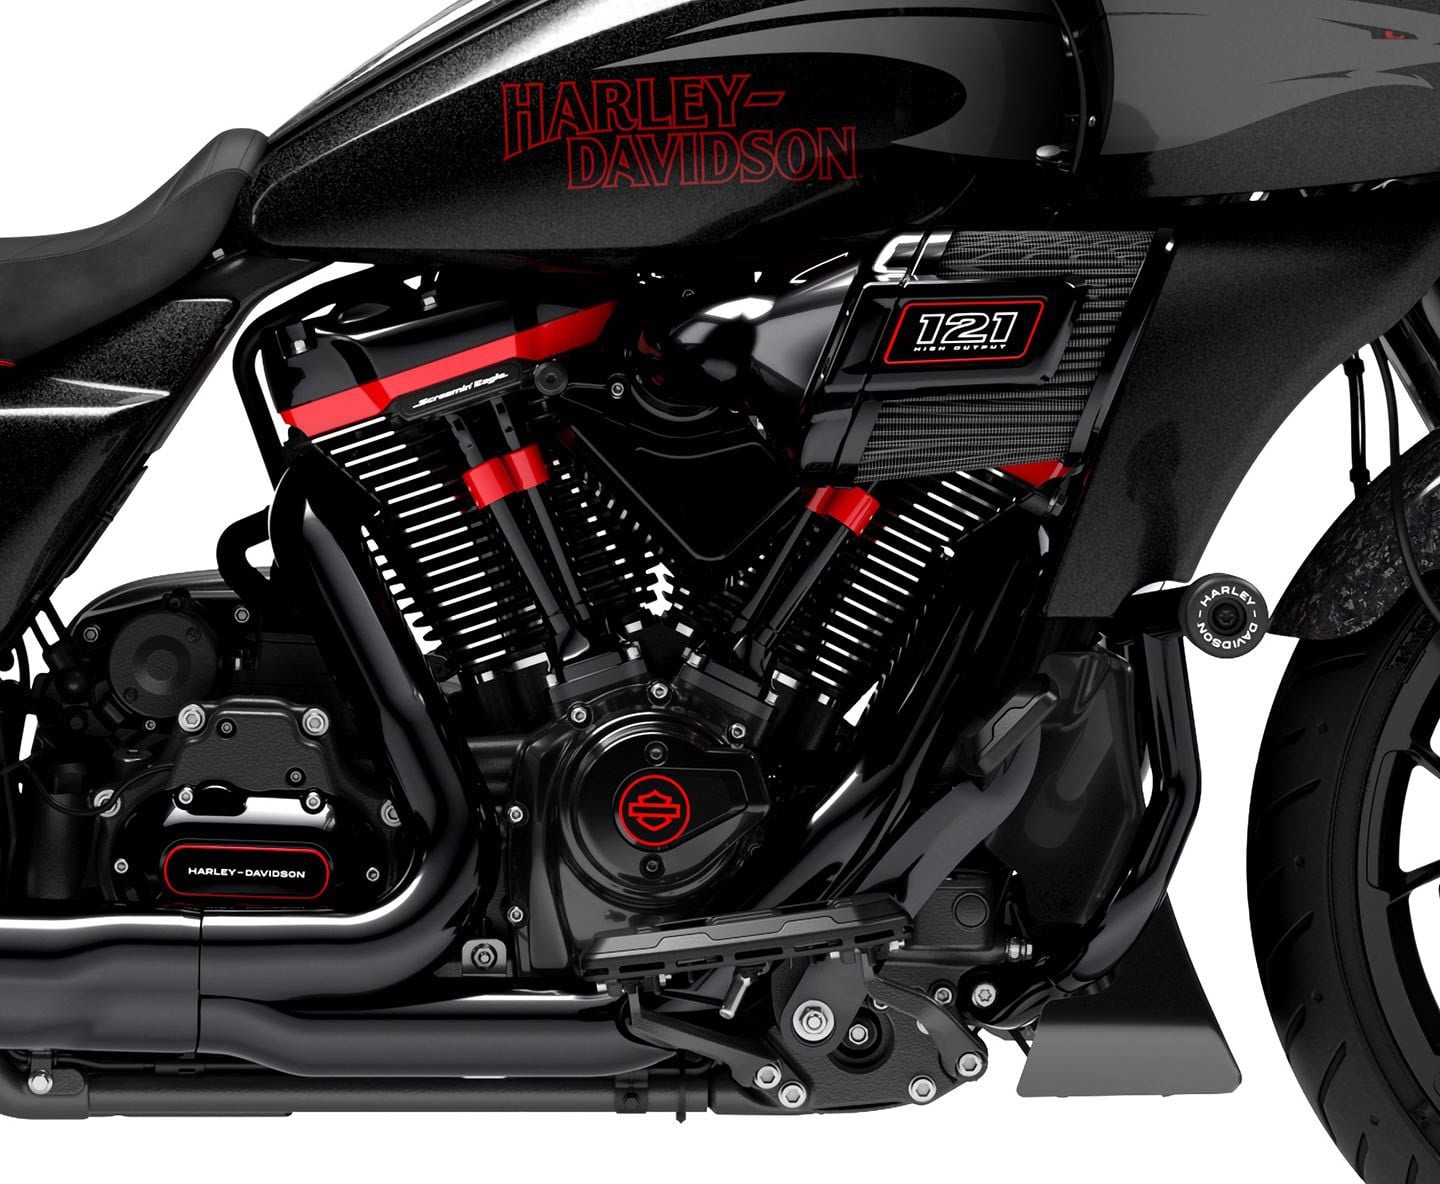 The CVO Road Glide ST embraces the “performance bagger” category courtesy of a Milwaukee-Eight 121 High Output V-twin engine tuned to produce more horsepower and torque than the Milwaukee-Eight VVT 121.